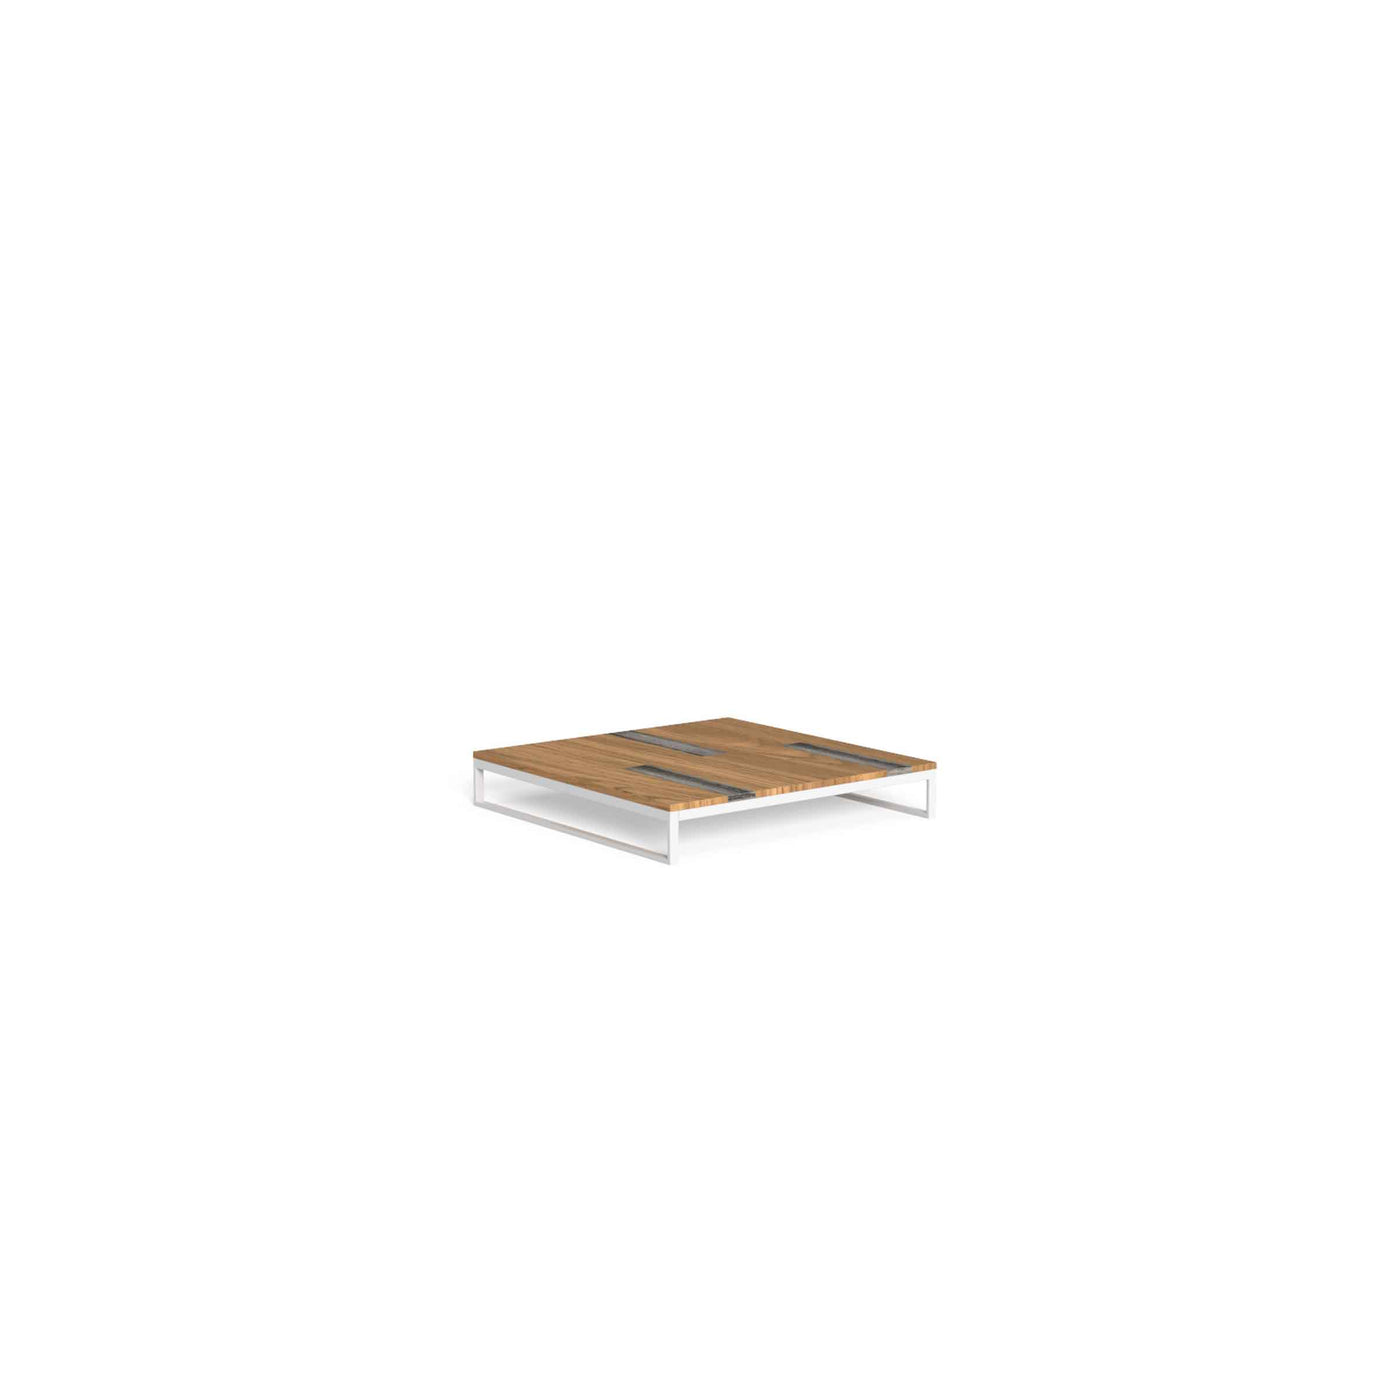 Outdoor Wood and Steel Coffee Table CASILDA by Ramón Esteve for Talenti 07